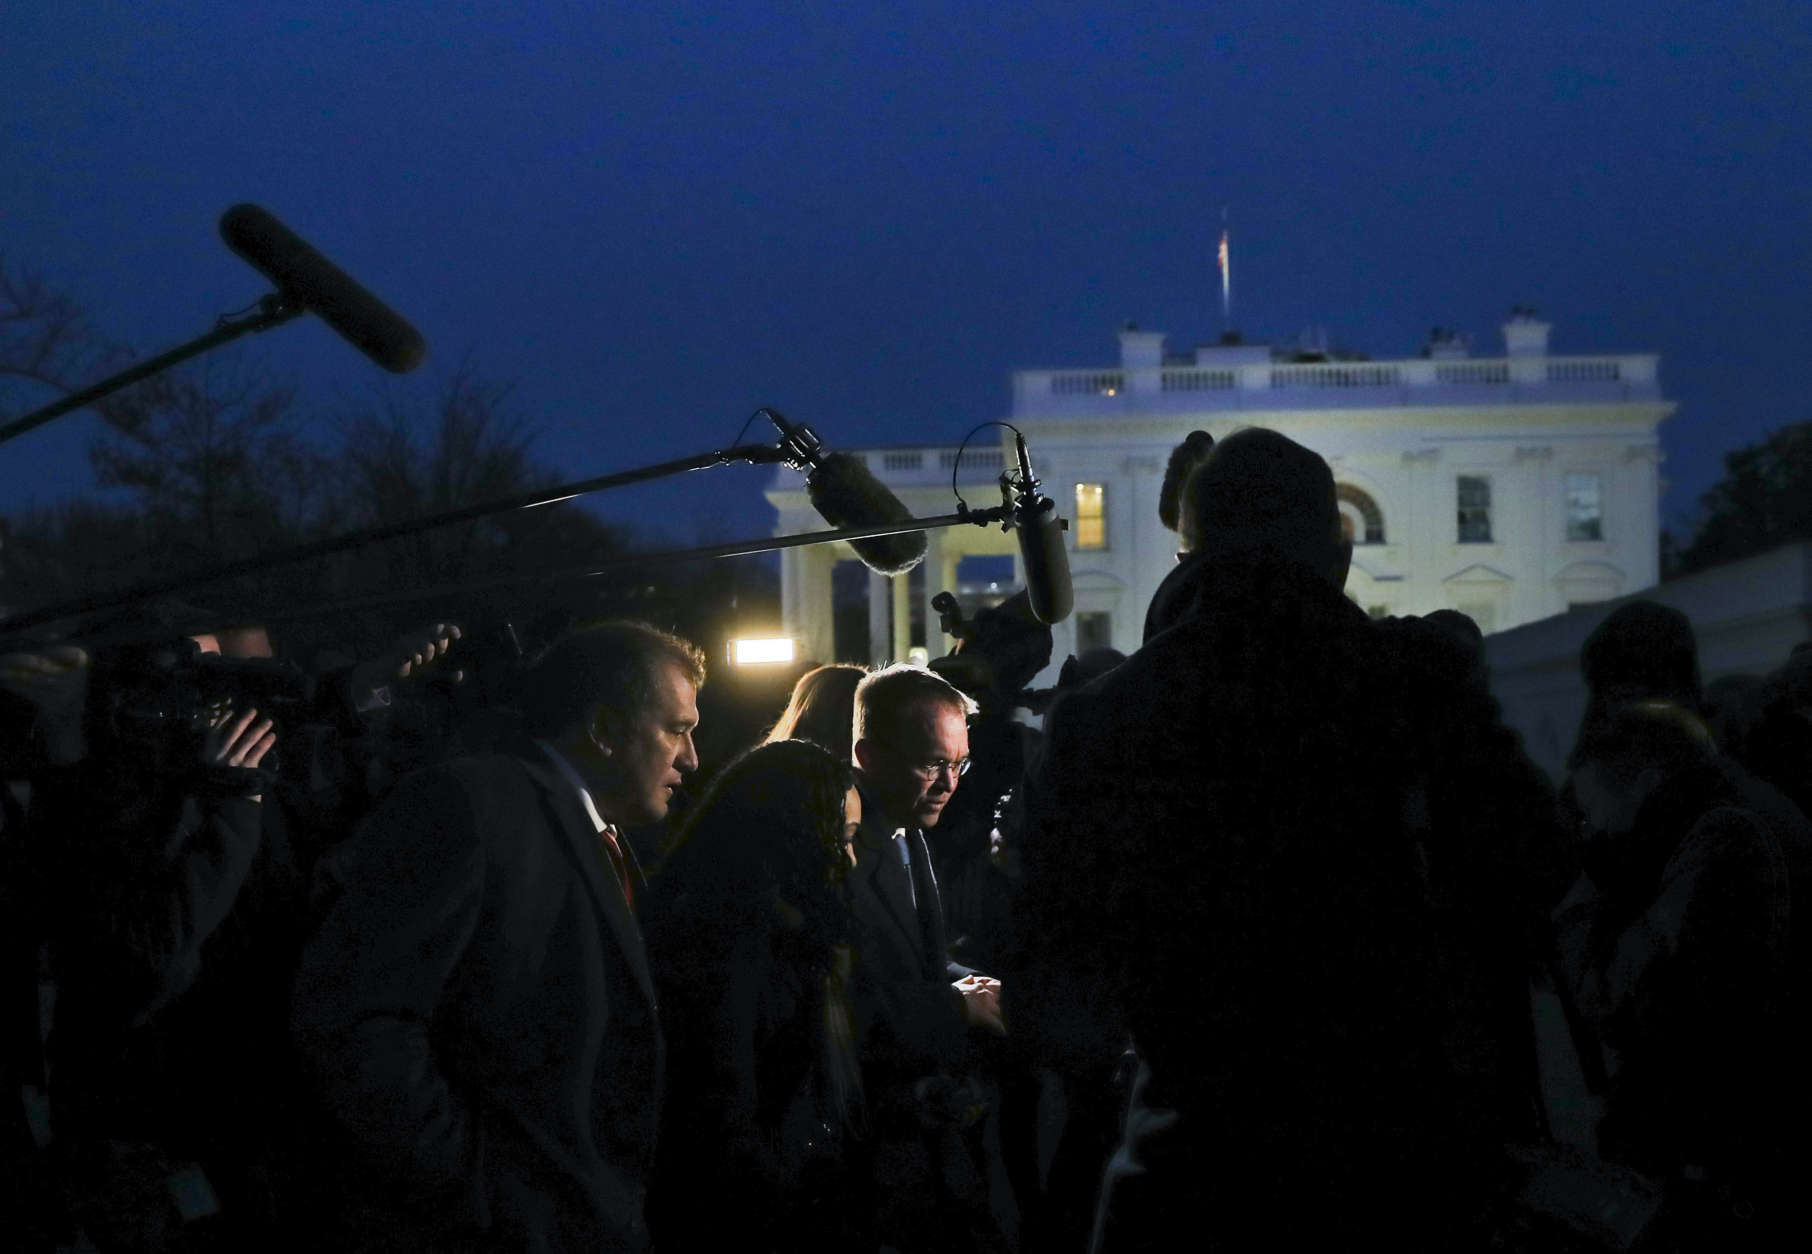 Director of the Office of Management and Budget Mick Mulvaney, center, is surrounded by members of the media outside the White House, Friday, Jan. 19, 2018, and is questioned about a potential government shutdown this weekend. (AP Photo/Pablo Martinez Monsivais)